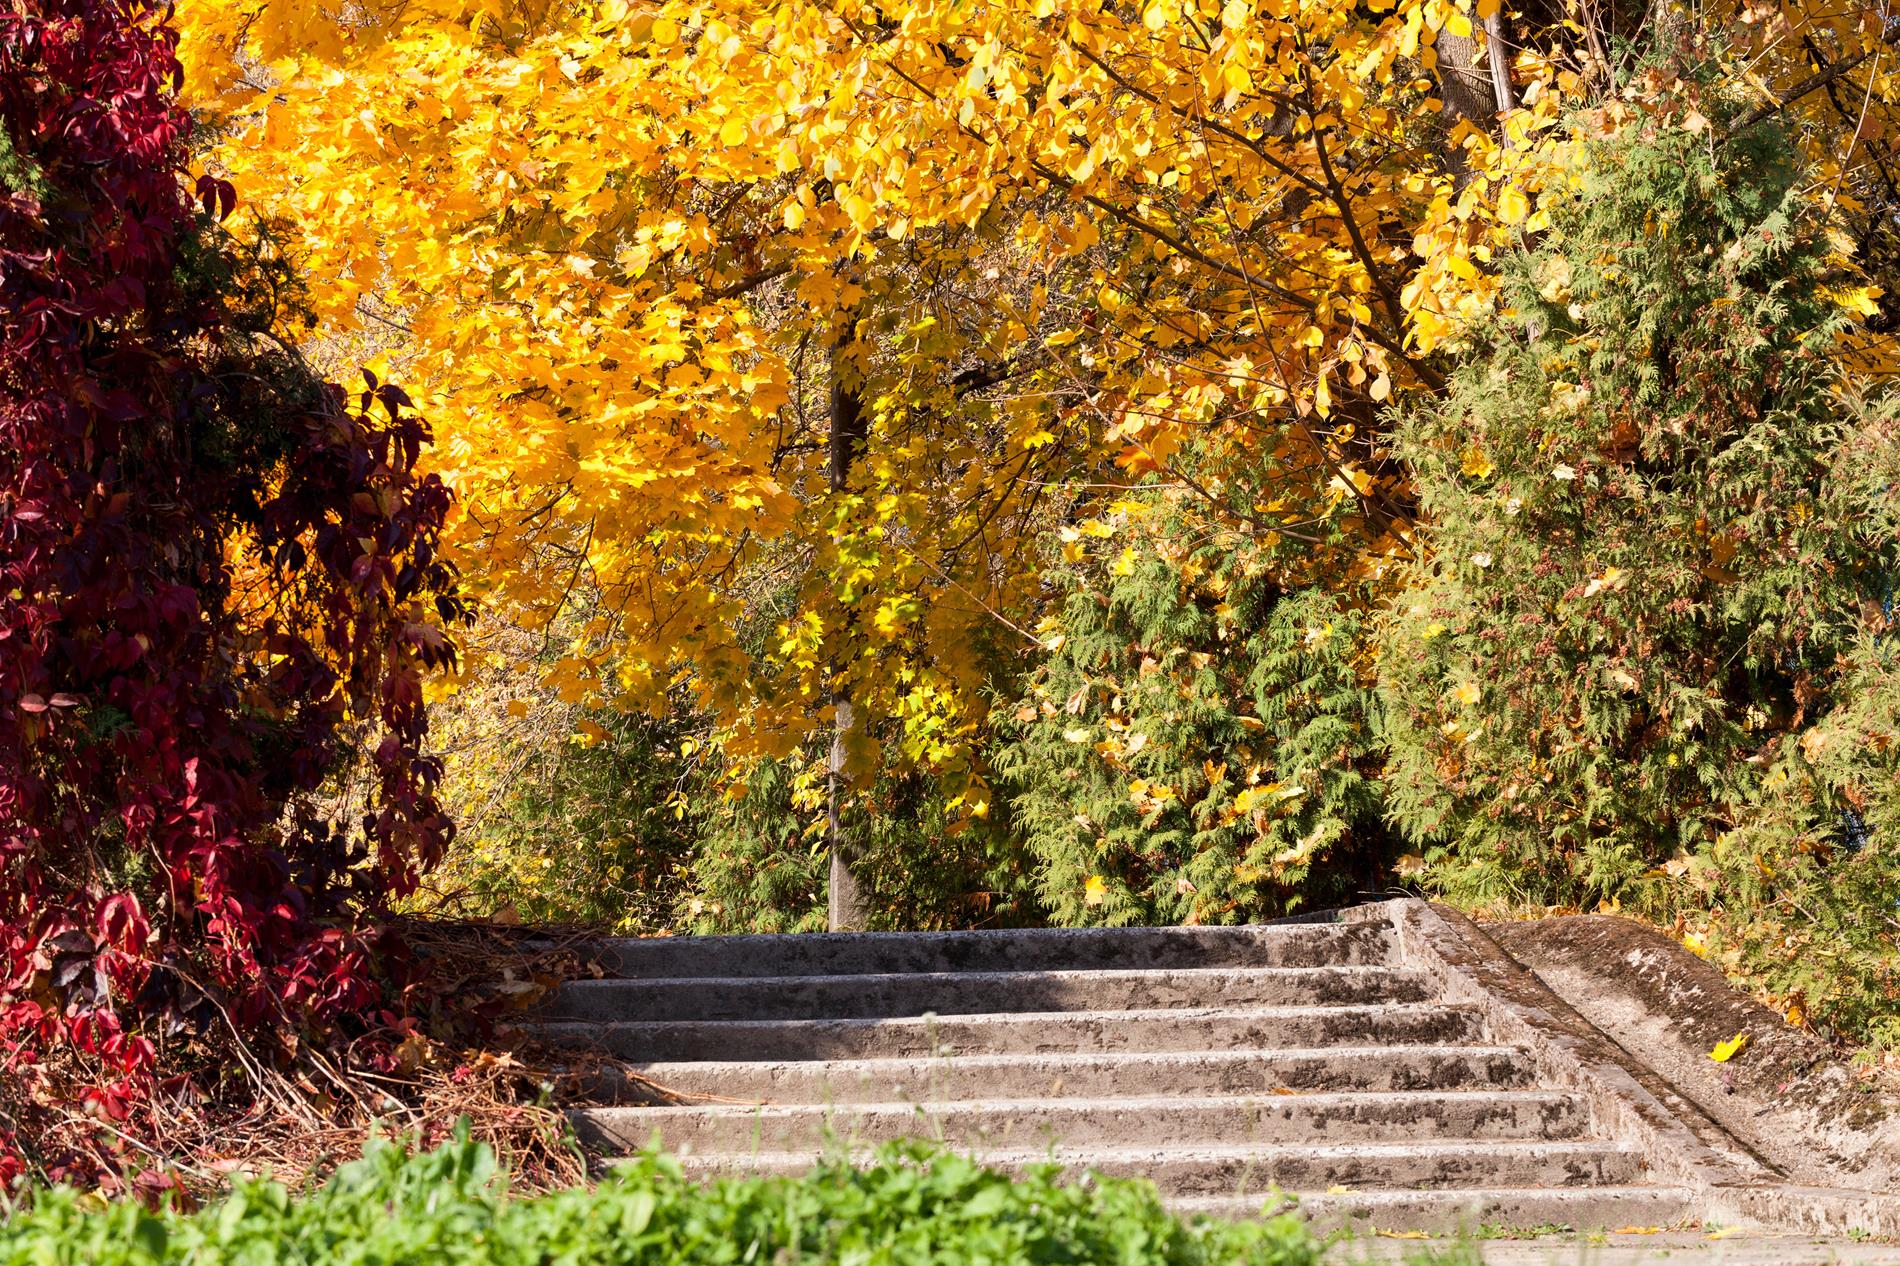 Stepping Stones Stairway to Autumn Color